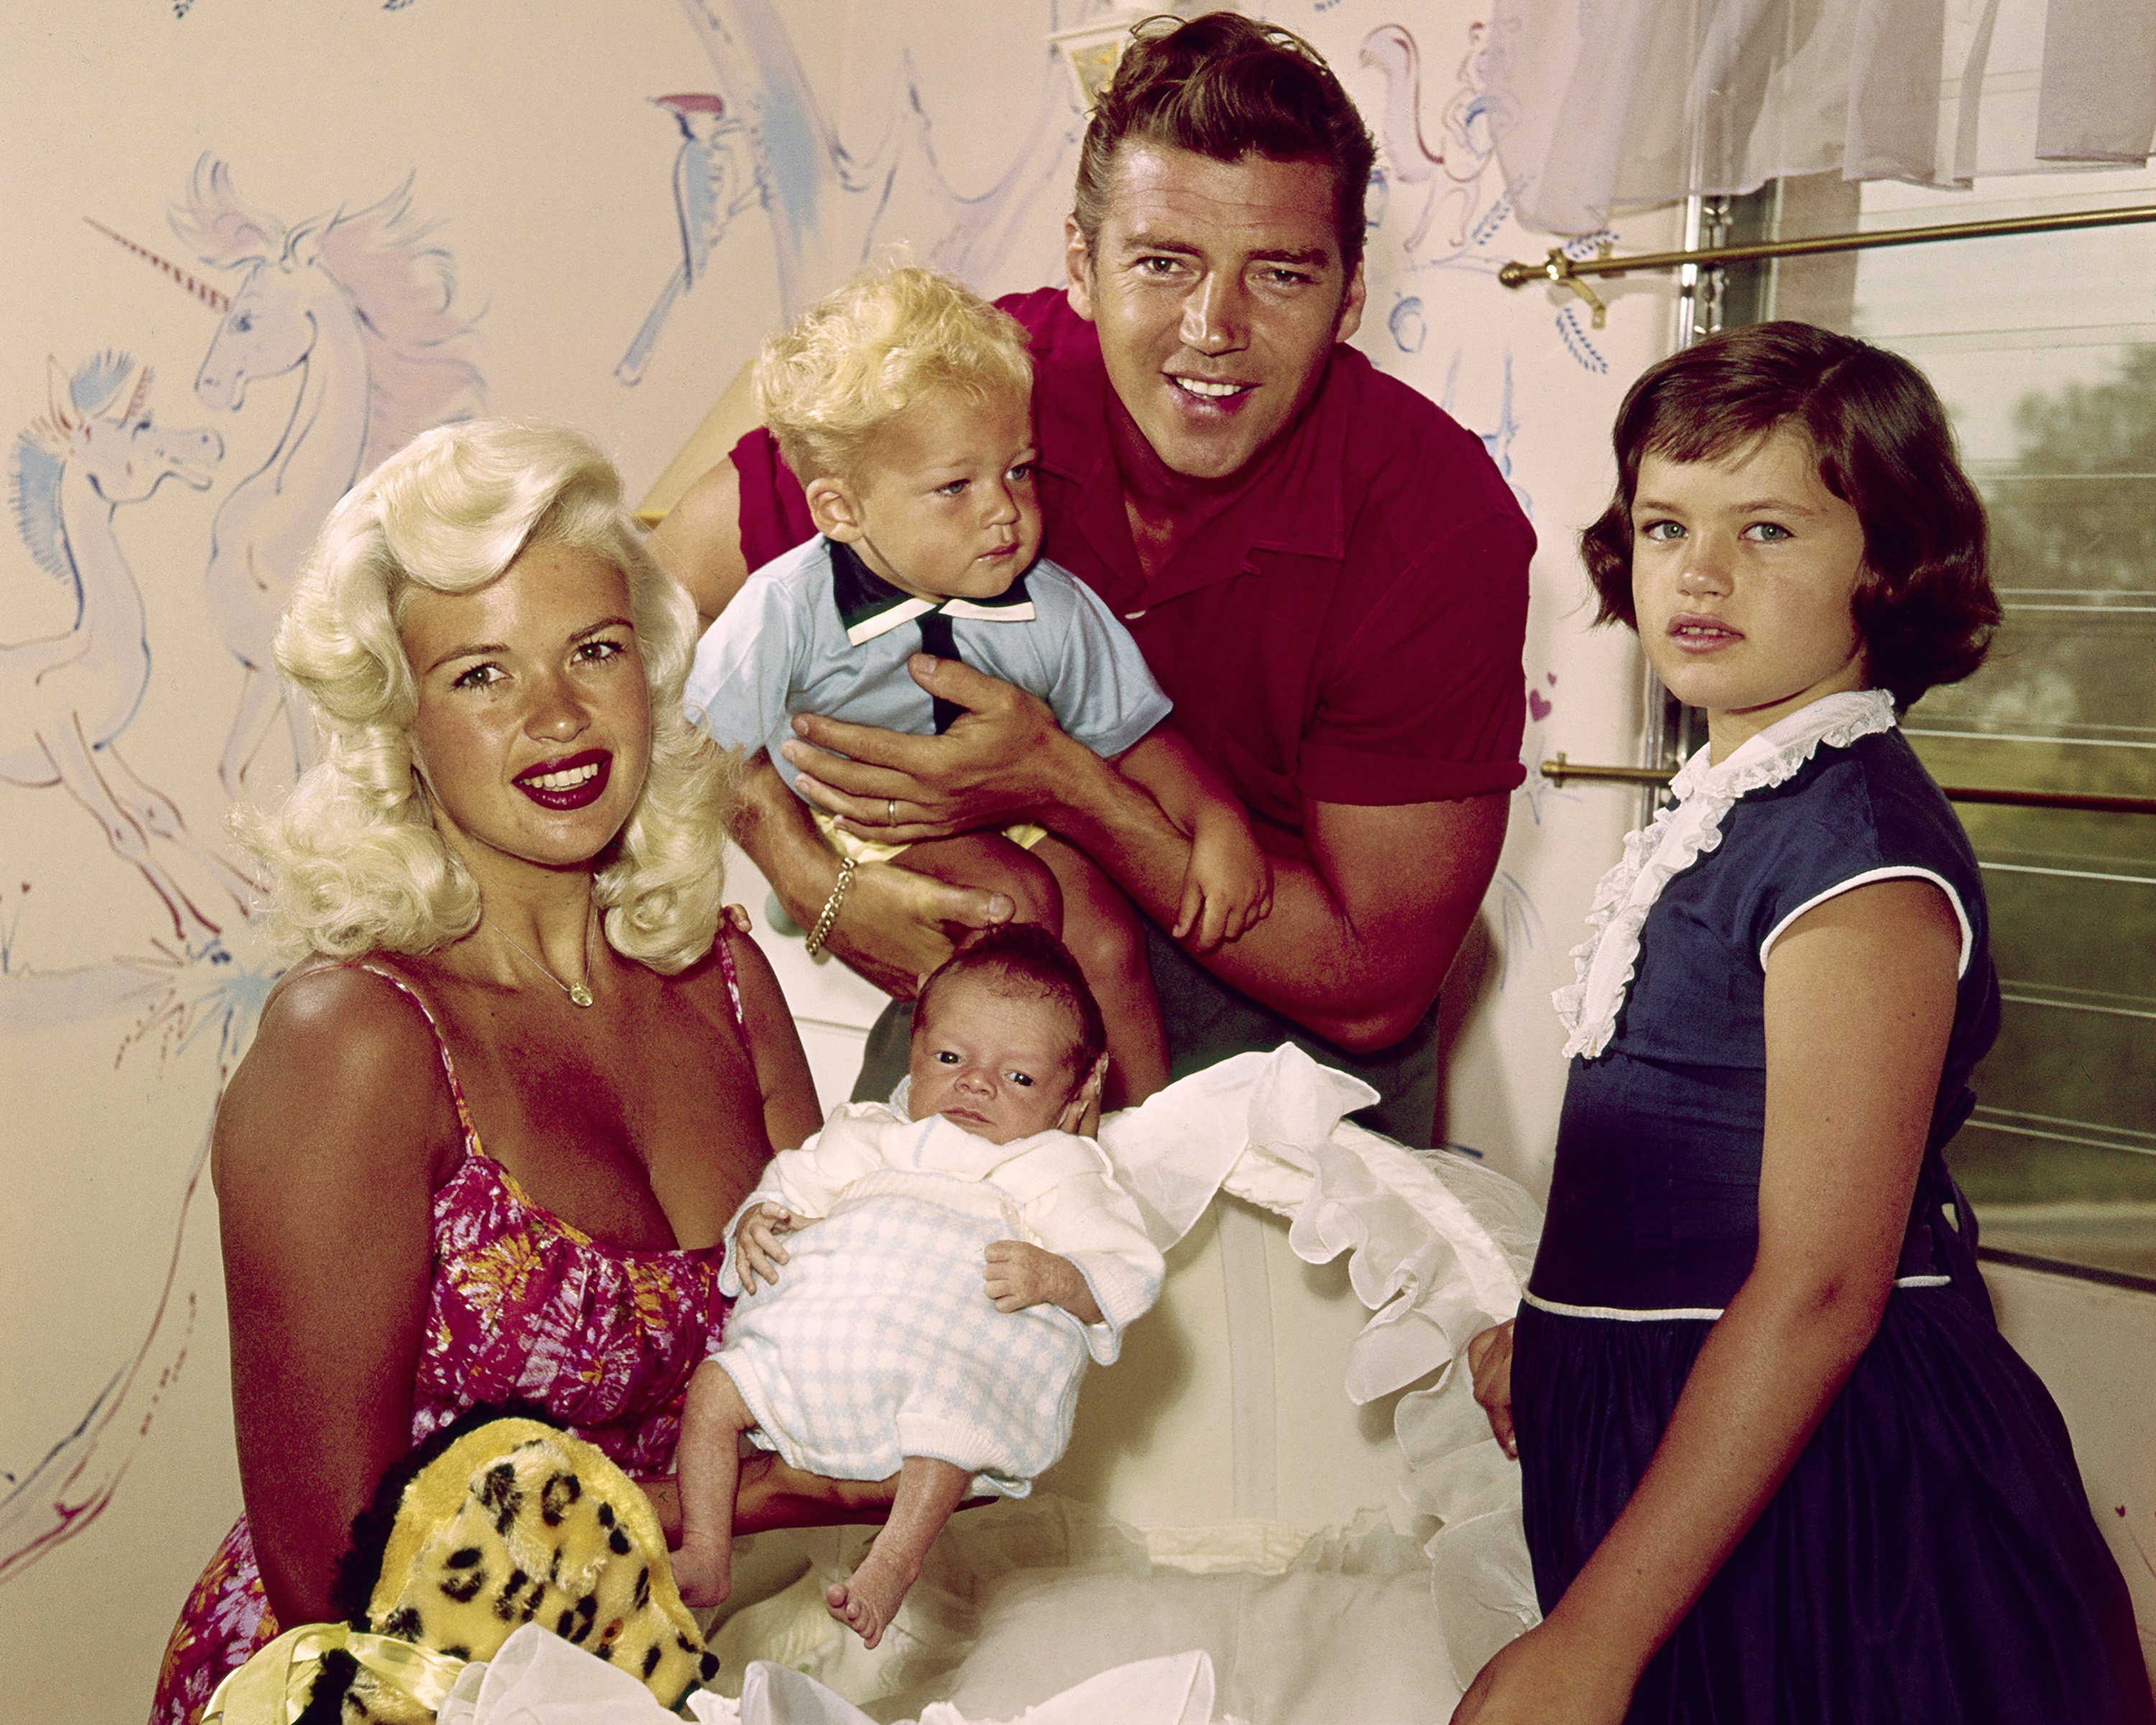 Jayne Mansfield, her husband Mickey Hargitay, and their children Jayne Marie, Miklos, and baby Zoltan in 1960 | Source: Getty Images